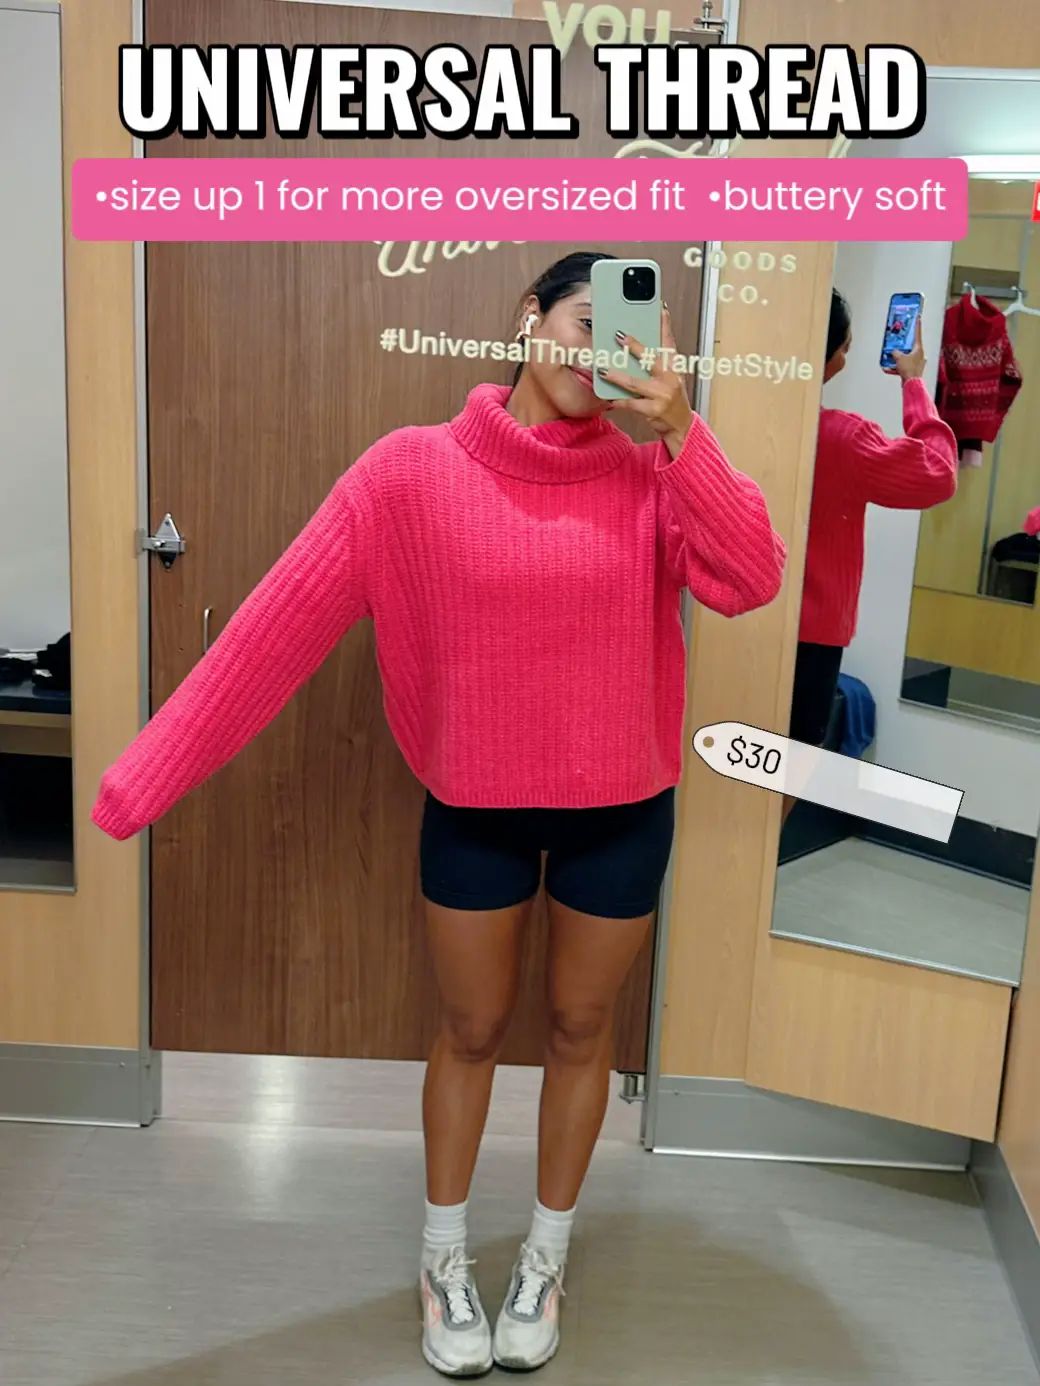  A woman in a pink sweater is taking a selfie in a mirror.